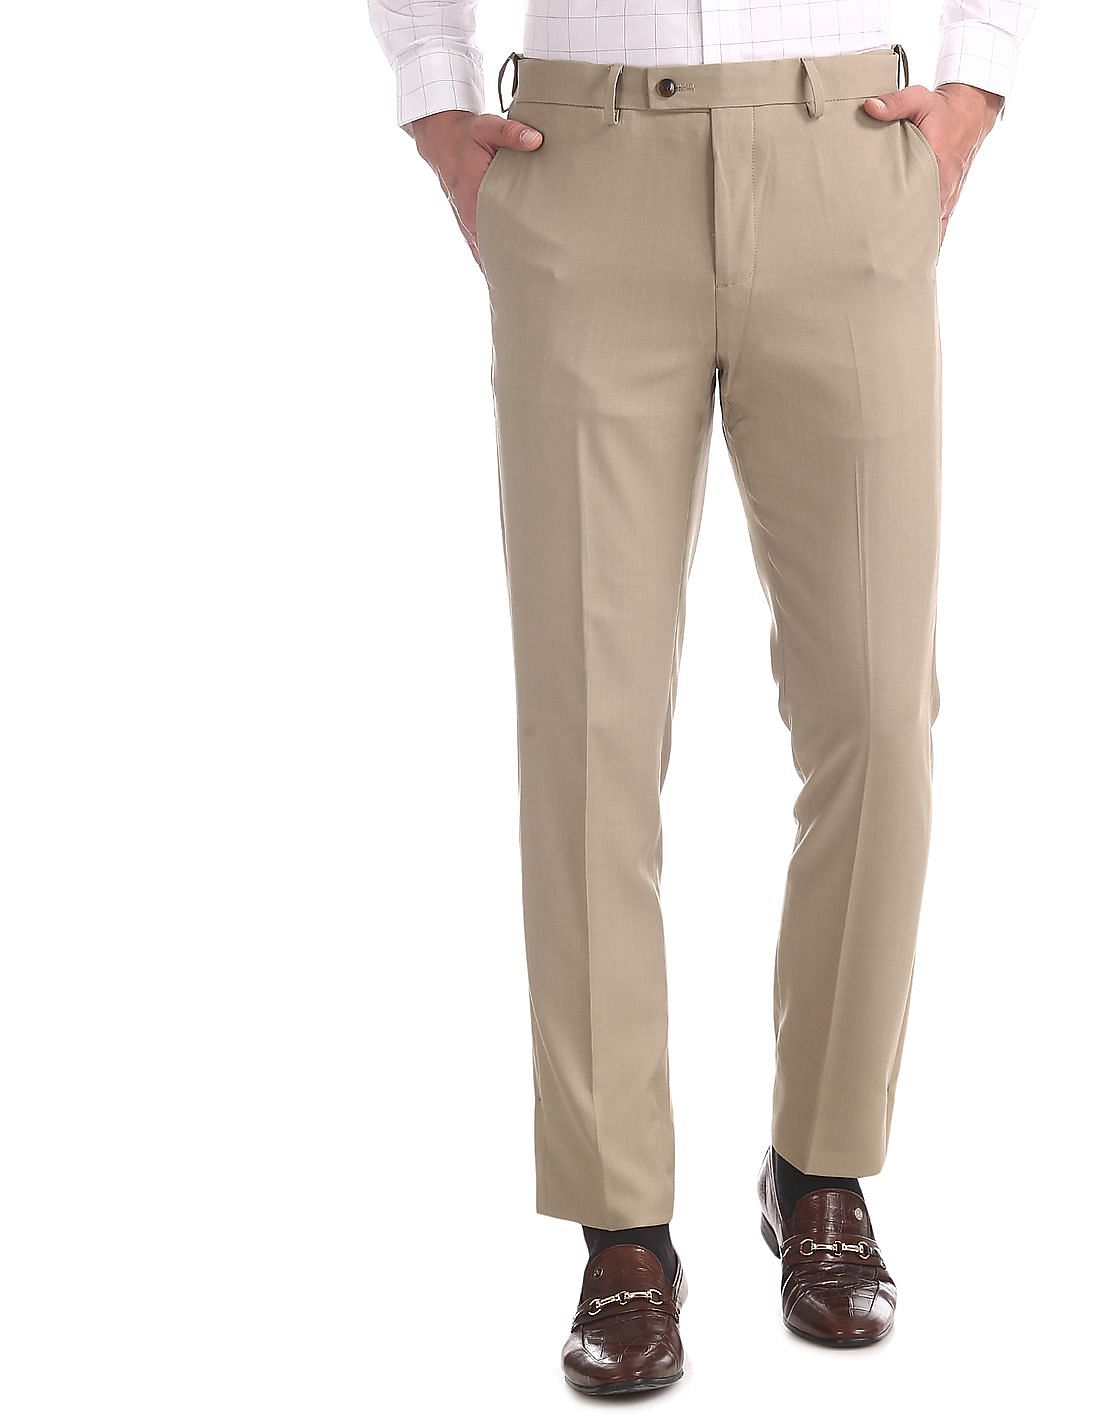 Buy Arrow Beige Tapered Fit Flat Front Trousers - NNNOW.com